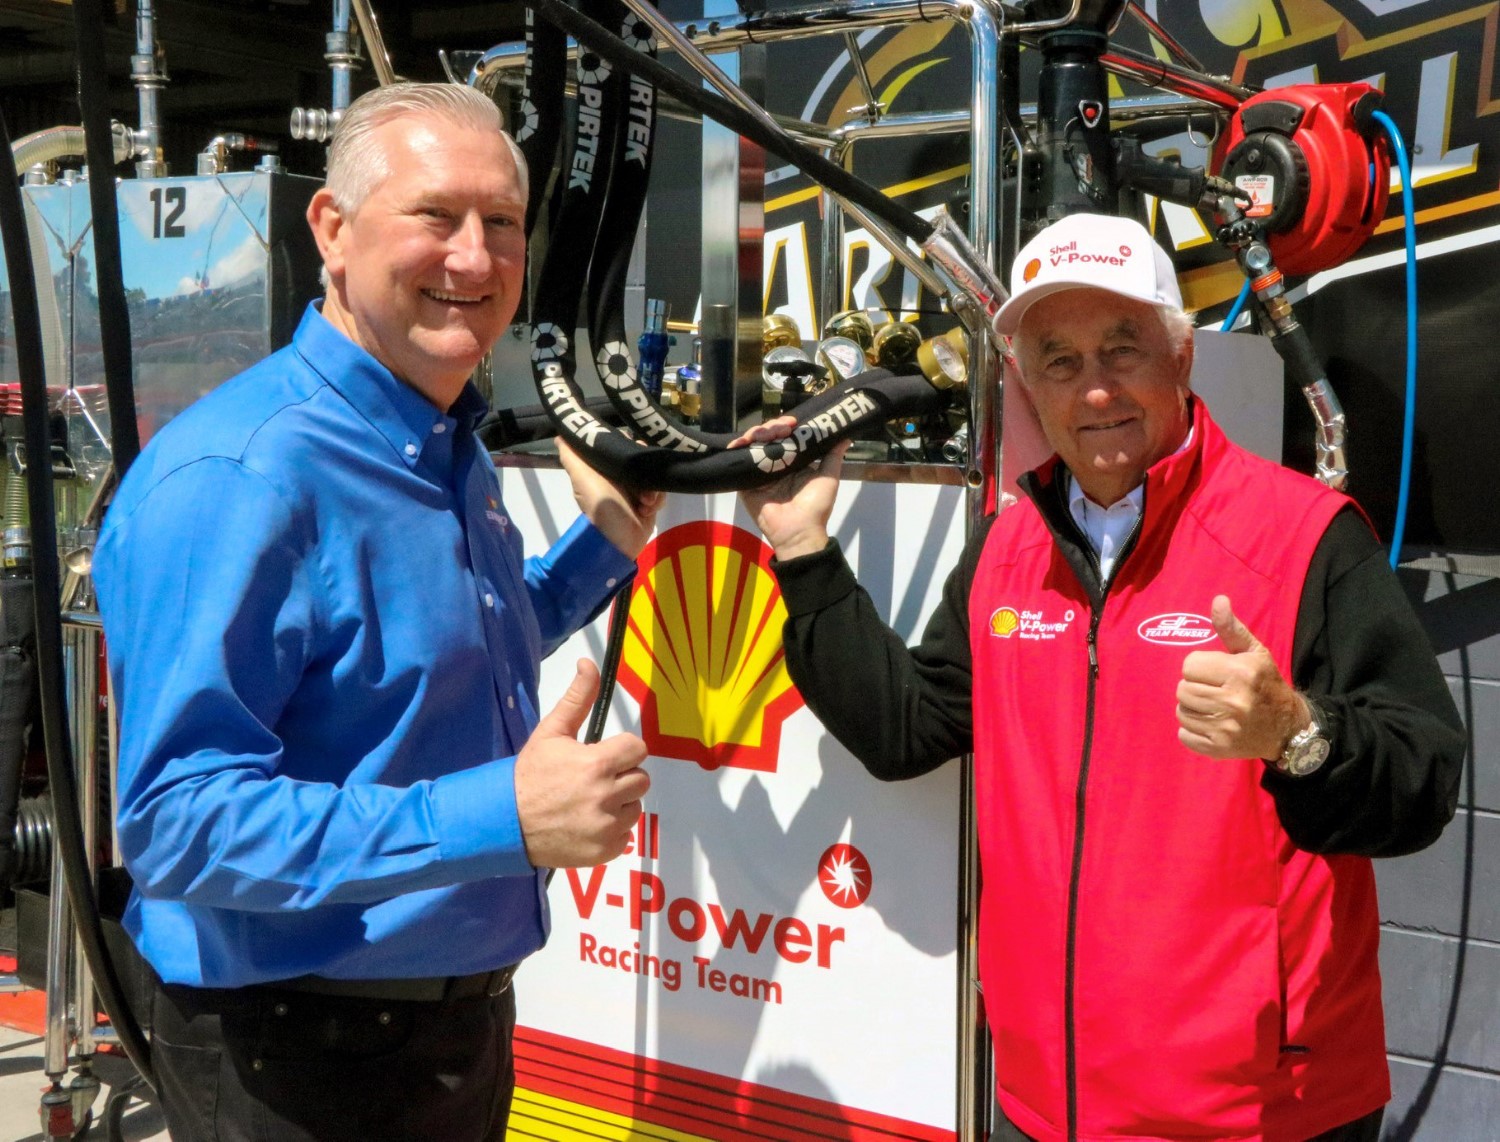 Stephen Dutton (L) and Roger Penske (R) inspect the Pirtek hydraulic hoses that allowed Shell V-Power Racing to win the Pirtek Pitstop Challenge for a second year running.